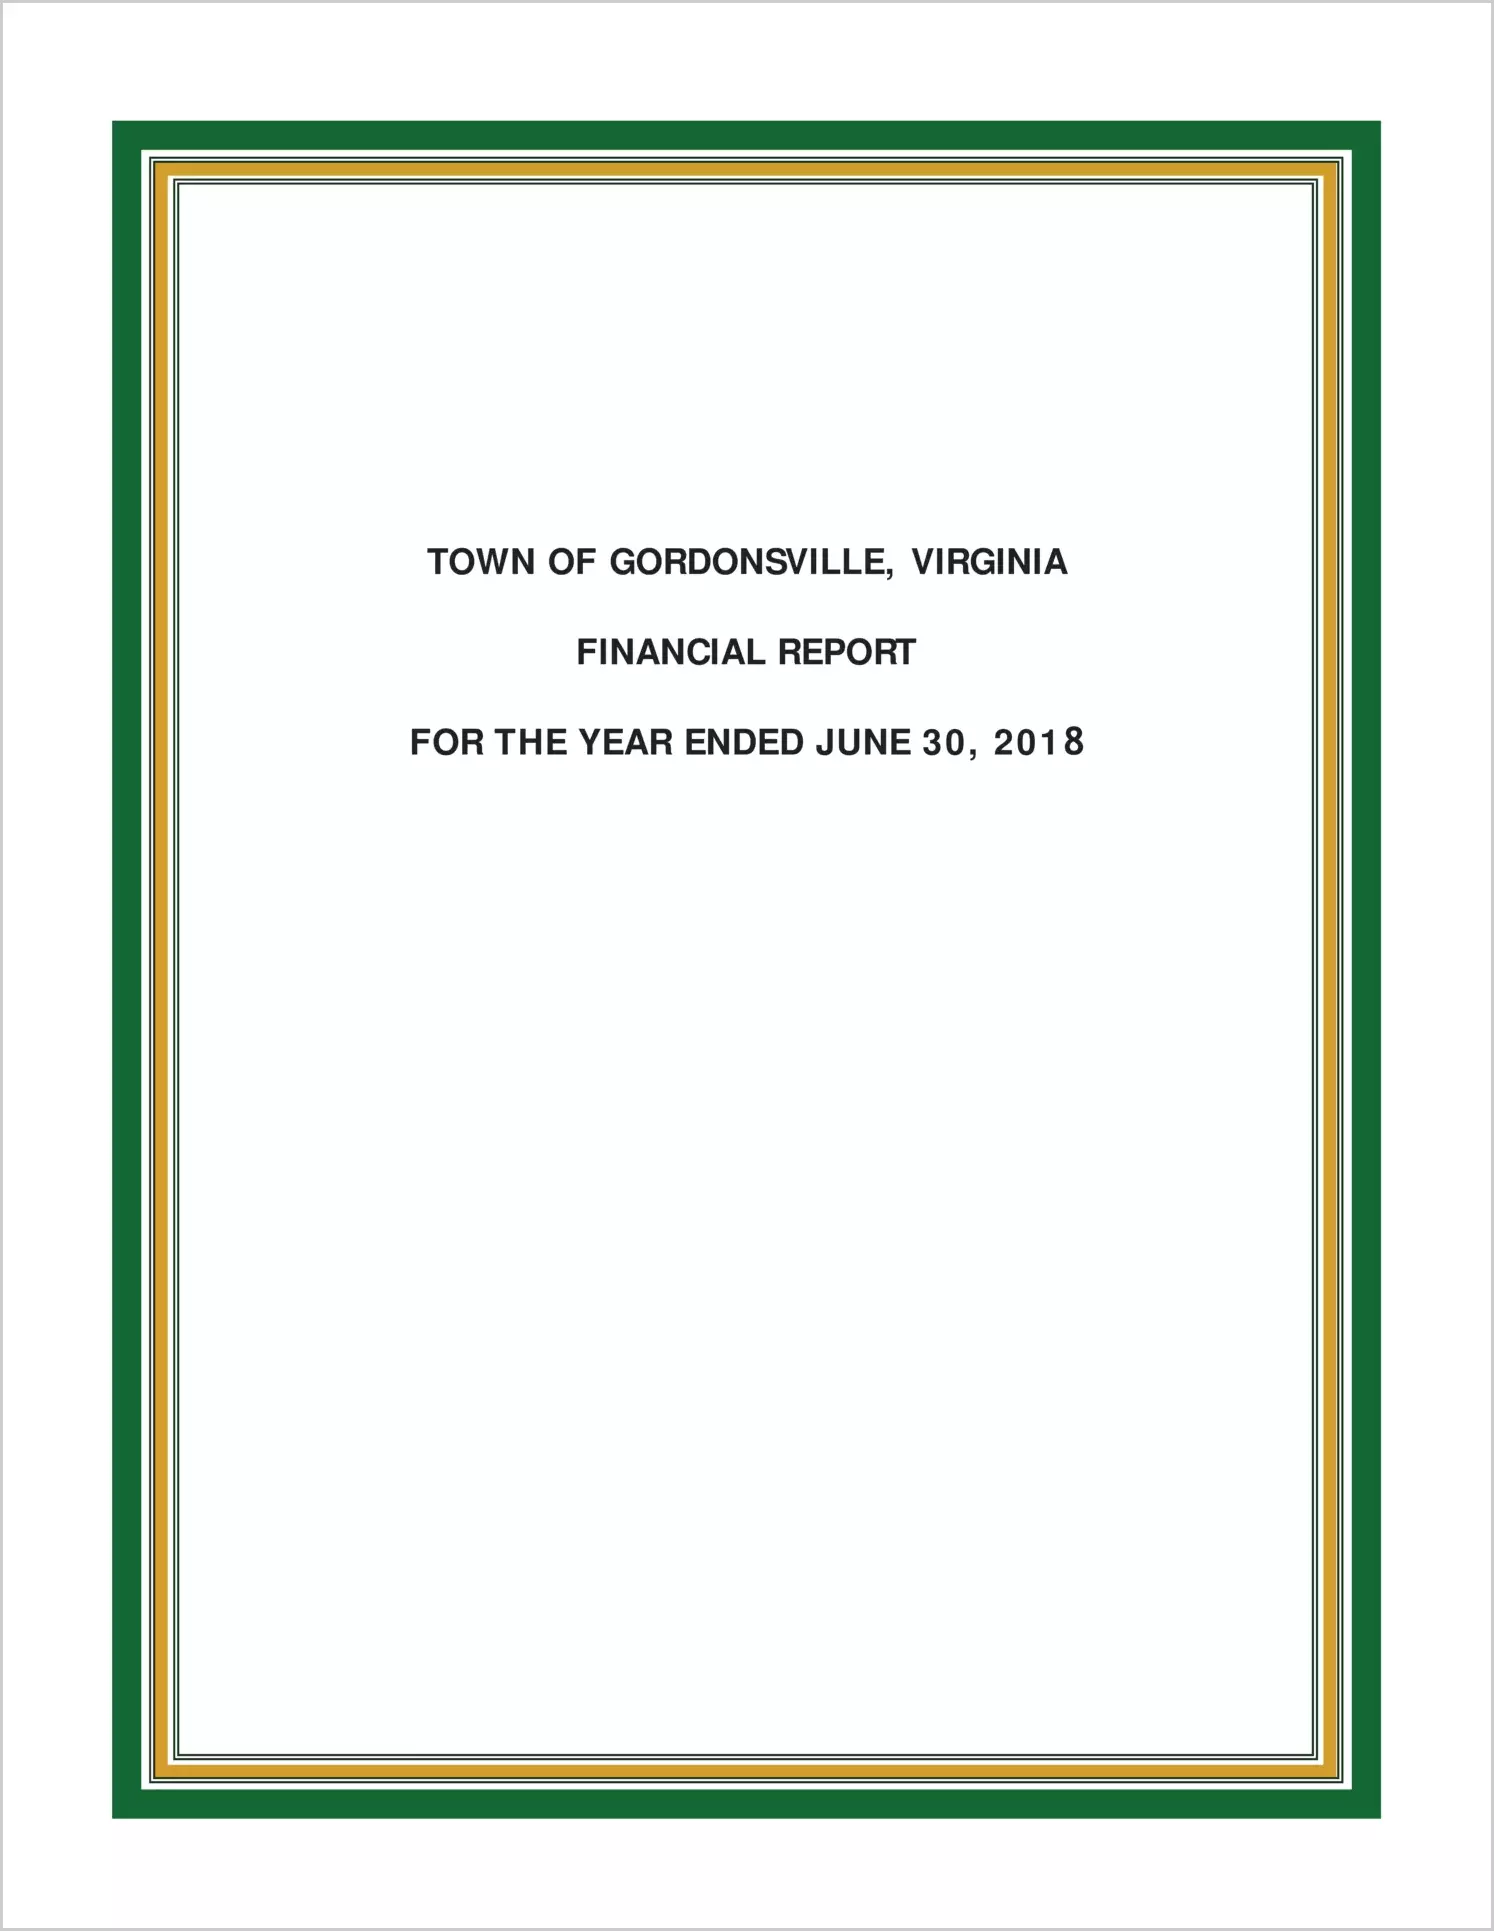 2018 Annual Financial Report for Town of Gordonsville